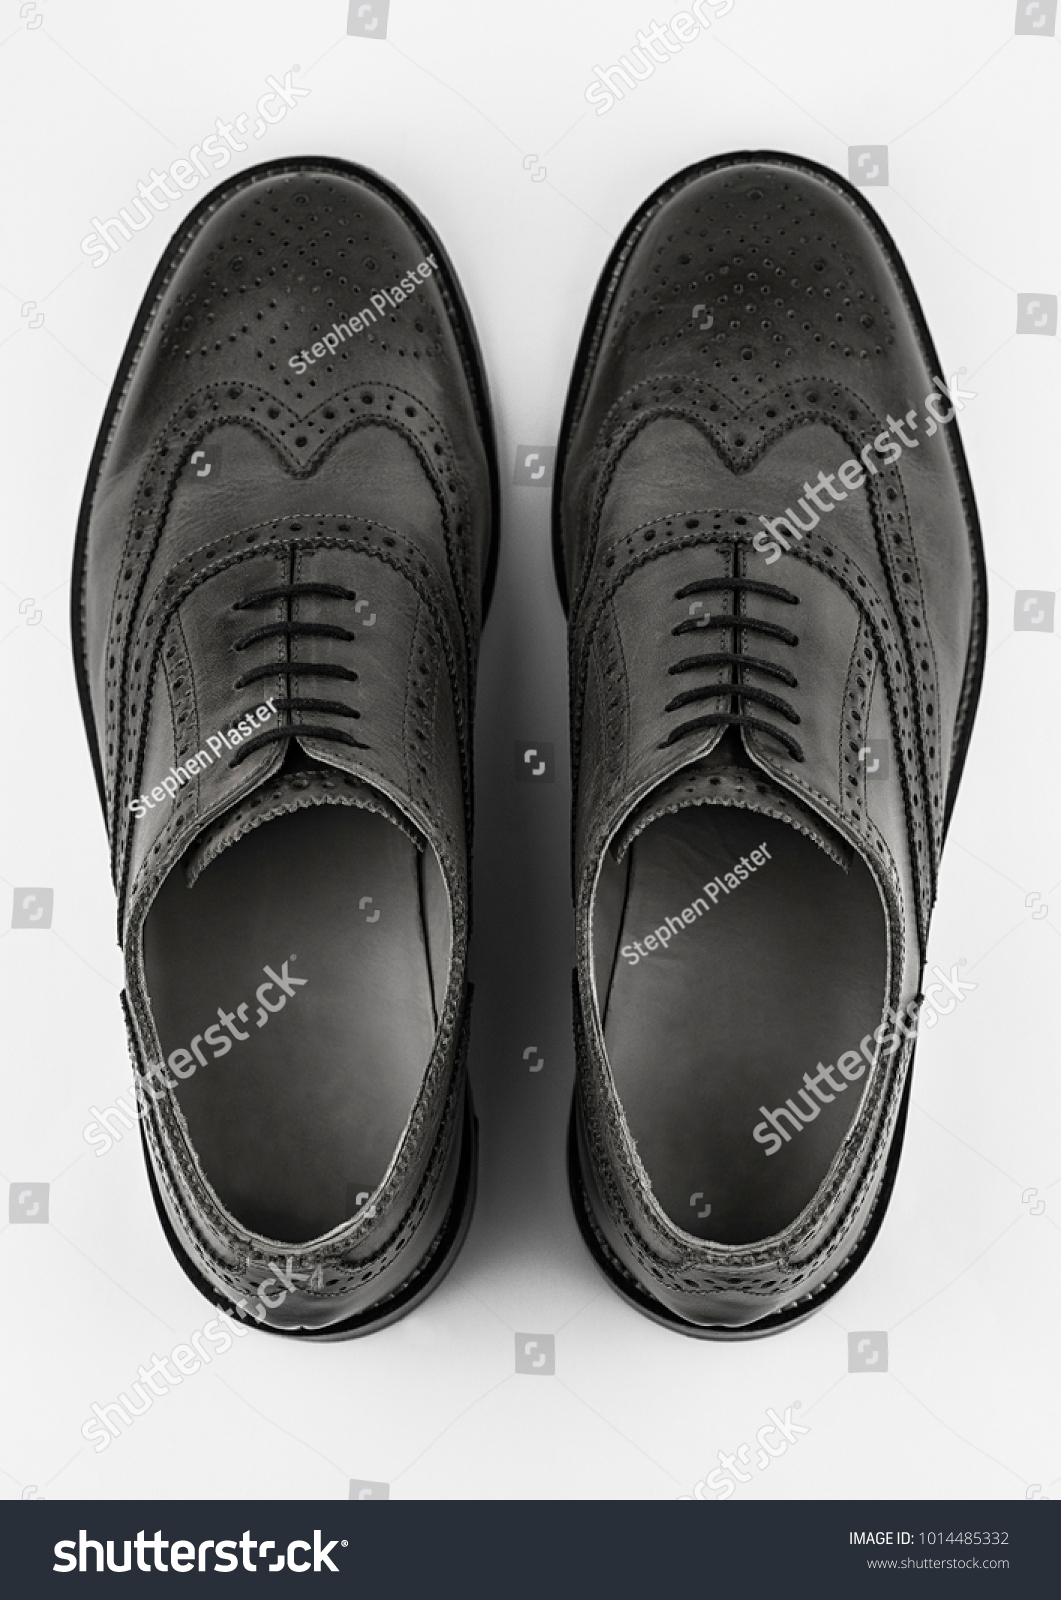 Pair of generic black brogue shoes shot from above on a white background. #1014485332